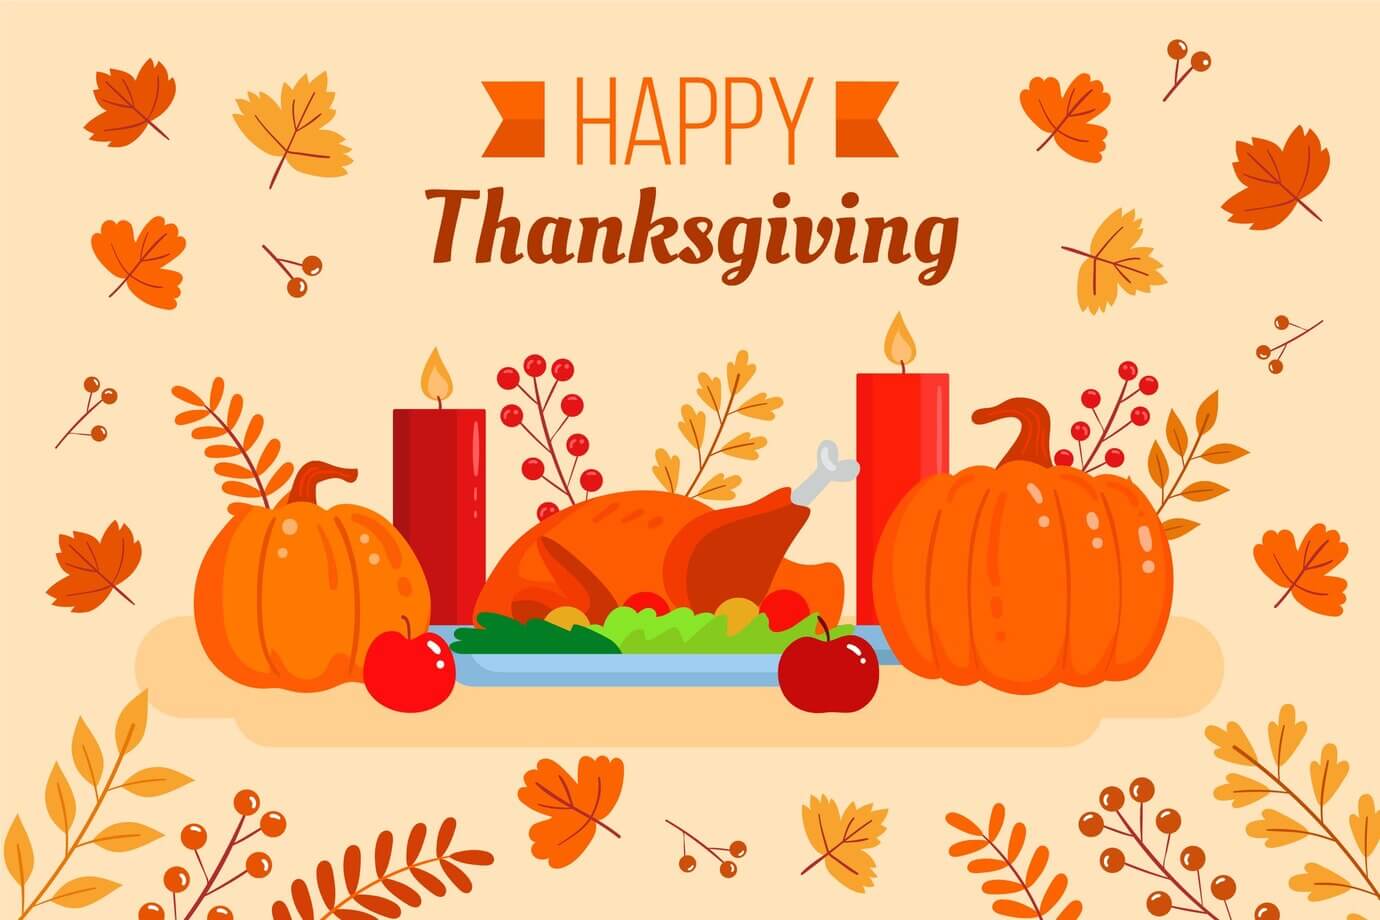 Inspirational Happy Thanksgiving Quotes